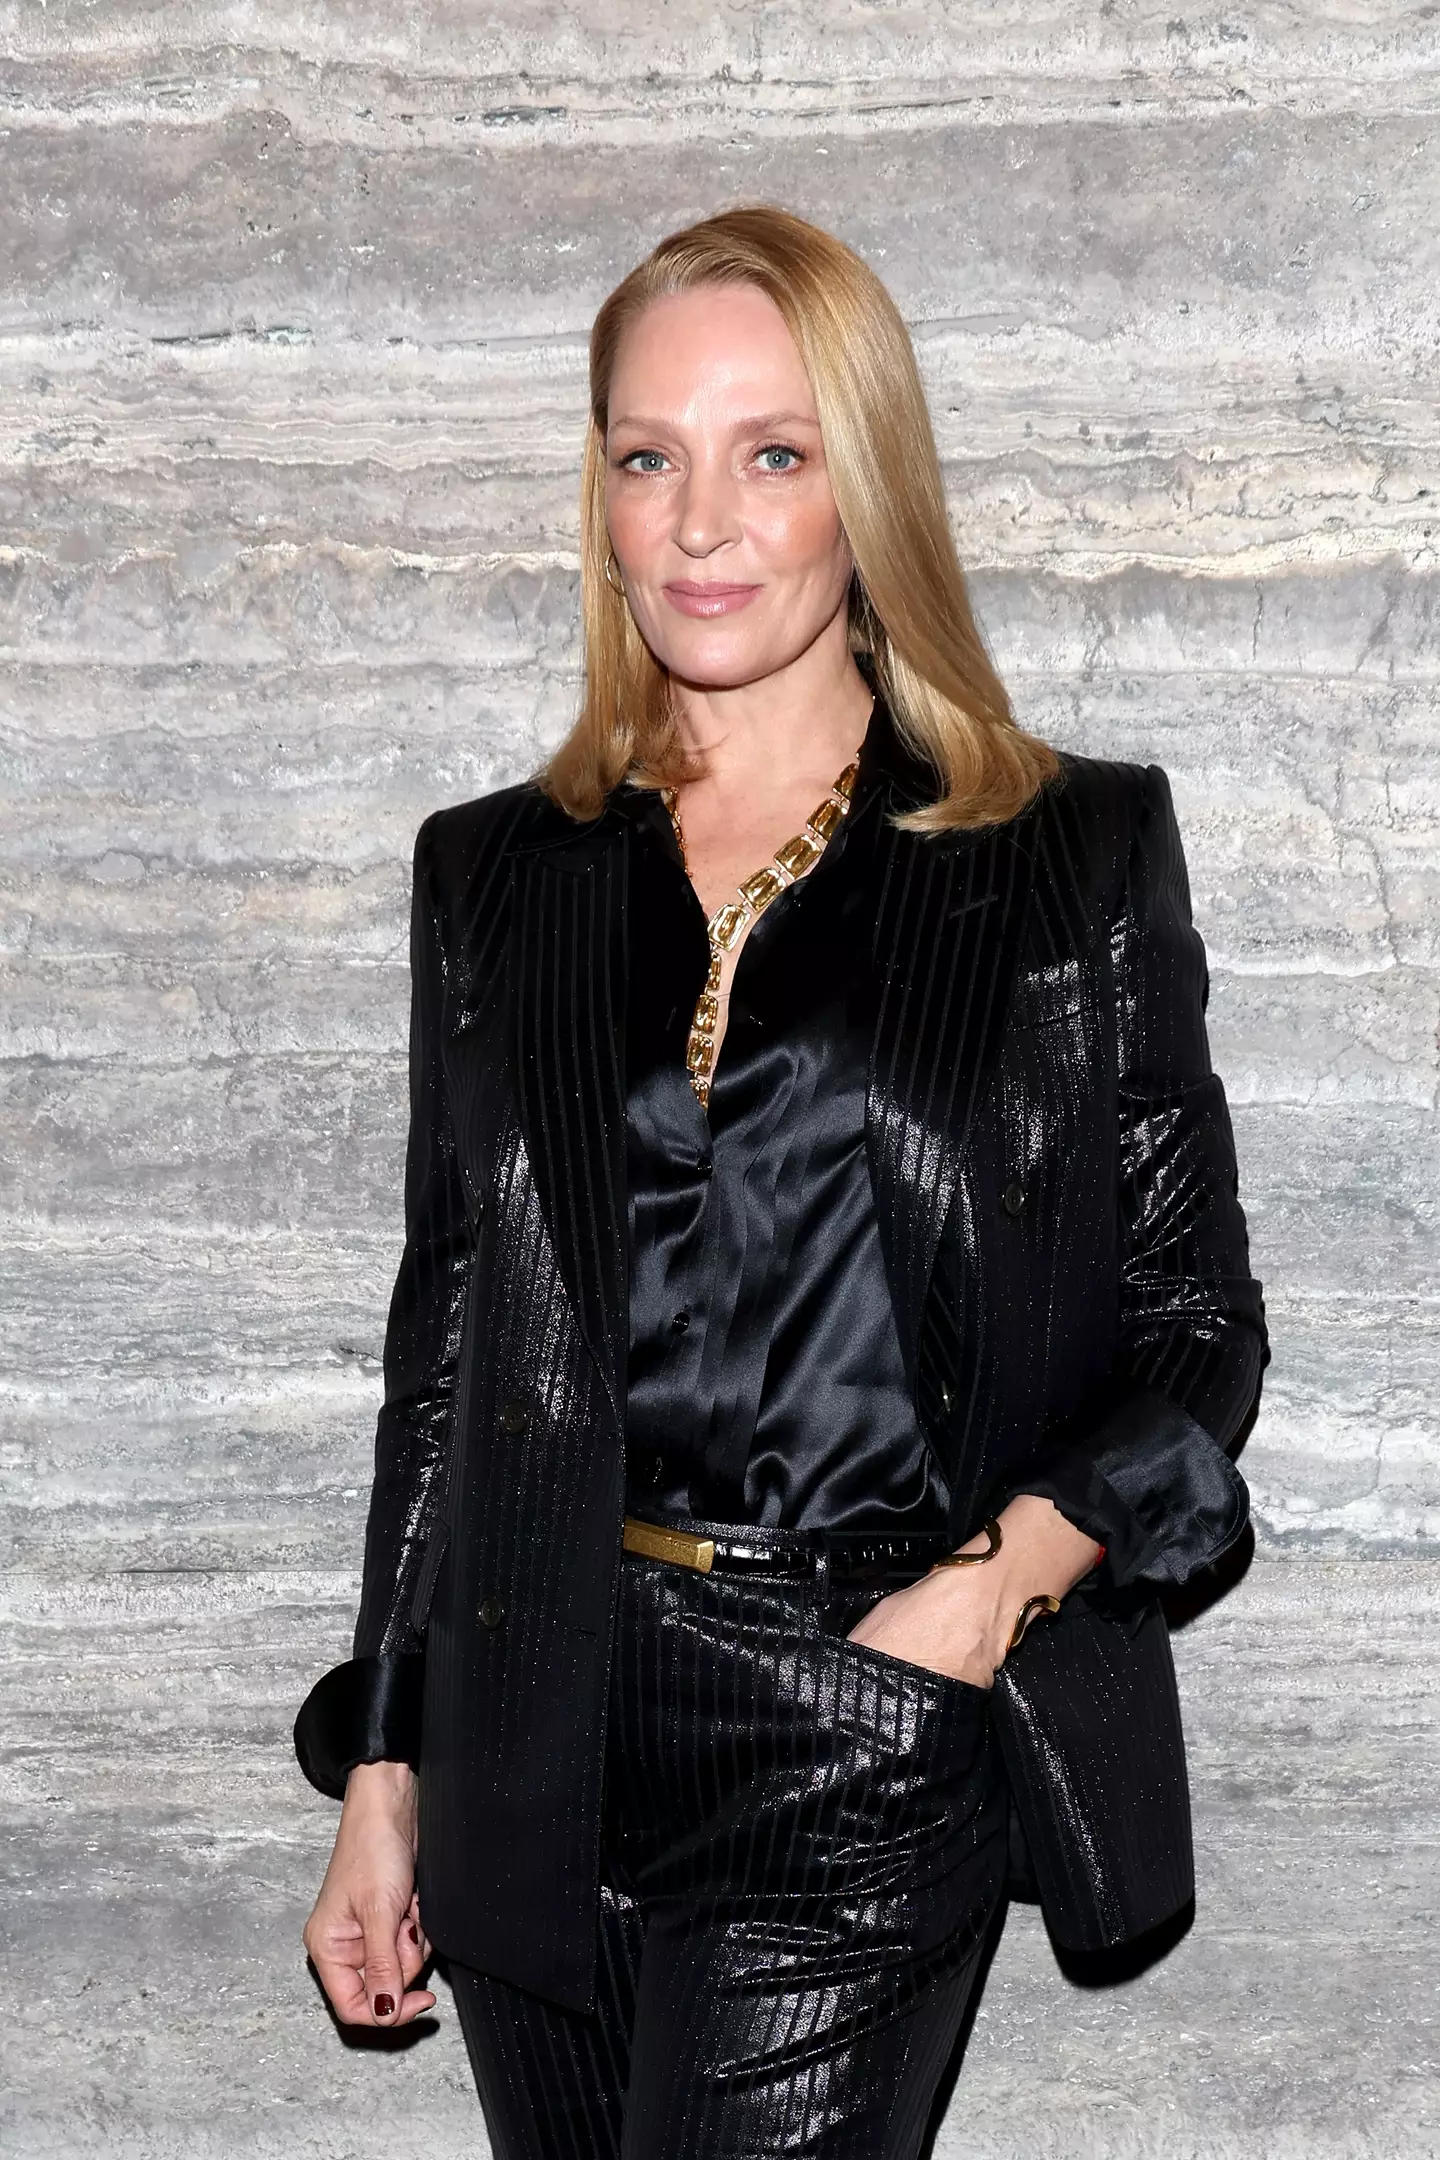 Uma Thurman has offered Drake her help. (Vittorio Zunino Celotto/Getty Images for Tom Ford)